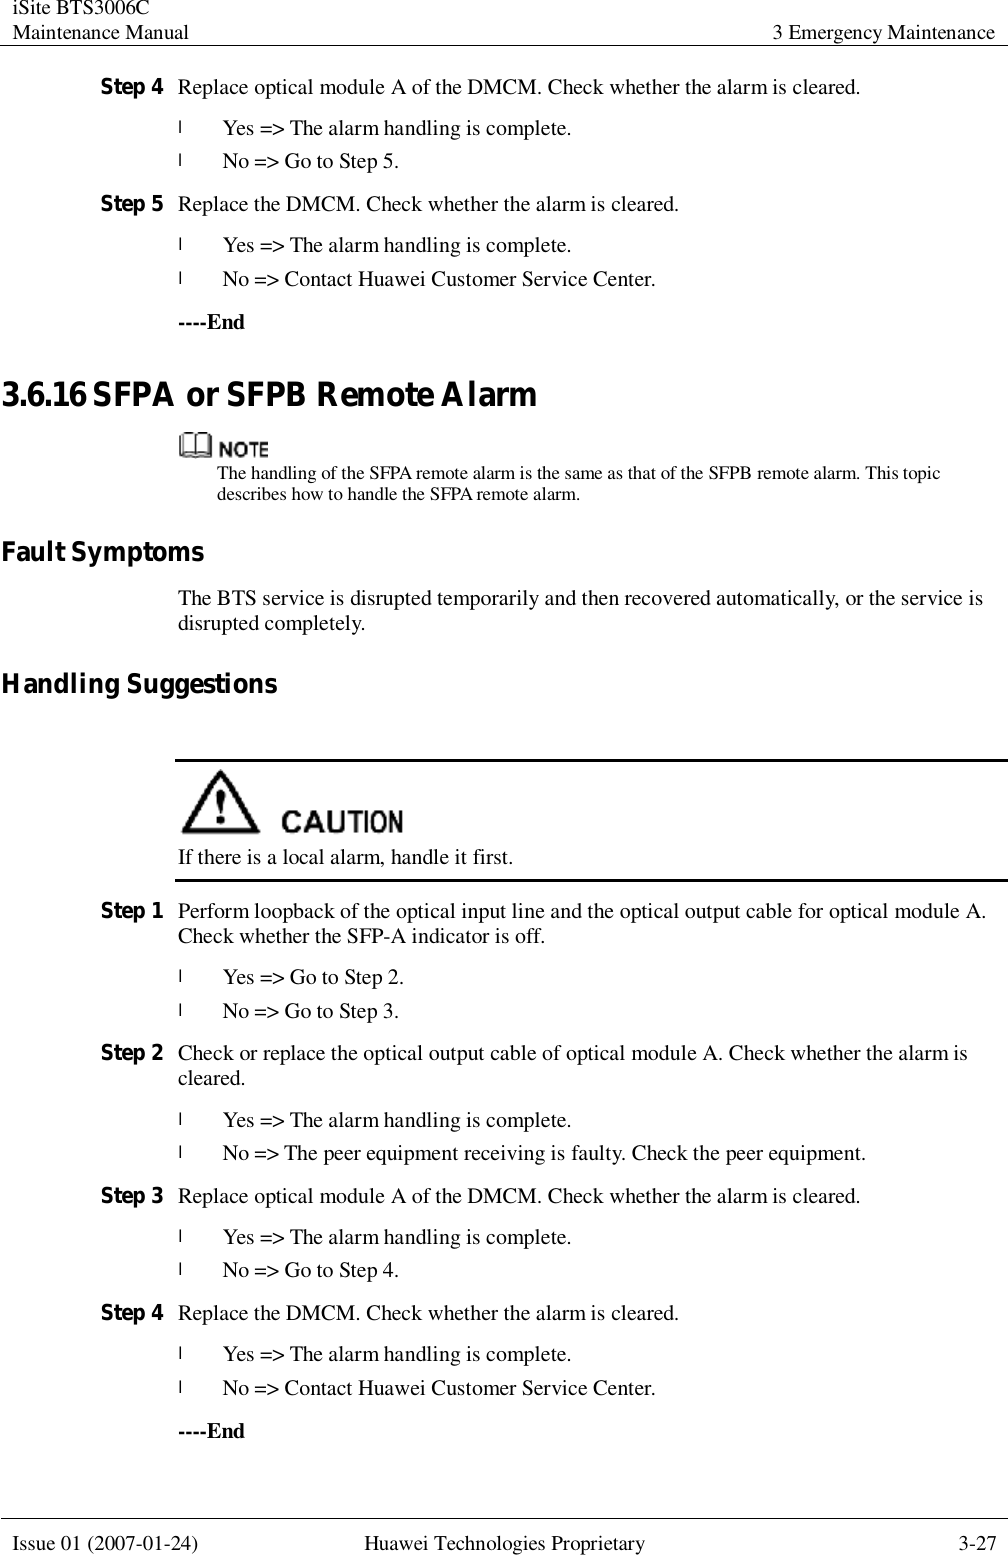 iSite BTS3006C Maintenance Manual 3 Emergency Maintenance  Issue 01 (2007-01-24) Huawei Technologies Proprietary 3-27  Step 4 Replace optical module A of the DMCM. Check whether the alarm is cleared. l Yes =&gt; The alarm handling is complete. l No =&gt; Go to Step 5. Step 5 Replace the DMCM. Check whether the alarm is cleared. l Yes =&gt; The alarm handling is complete.  l No =&gt; Contact Huawei Customer Service Center. ----End 3.6.16 SFPA or SFPB Remote Alarm  The handling of the SFPA remote alarm is the same as that of the SFPB remote alarm. This topic describes how to handle the SFPA remote alarm. Fault Symptoms The BTS service is disrupted temporarily and then recovered automatically, or the service is disrupted completely. Handling Suggestions   If there is a local alarm, handle it first. Step 1 Perform loopback of the optical input line and the optical output cable for optical module A. Check whether the SFP-A indicator is off. l Yes =&gt; Go to Step 2. l No =&gt; Go to Step 3. Step 2 Check or replace the optical output cable of optical module A. Check whether the alarm is cleared. l Yes =&gt; The alarm handling is complete. l No =&gt; The peer equipment receiving is faulty. Check the peer equipment. Step 3 Replace optical module A of the DMCM. Check whether the alarm is cleared. l Yes =&gt; The alarm handling is complete. l No =&gt; Go to Step 4. Step 4 Replace the DMCM. Check whether the alarm is cleared. l Yes =&gt; The alarm handling is complete.  l No =&gt; Contact Huawei Customer Service Center. ----End 